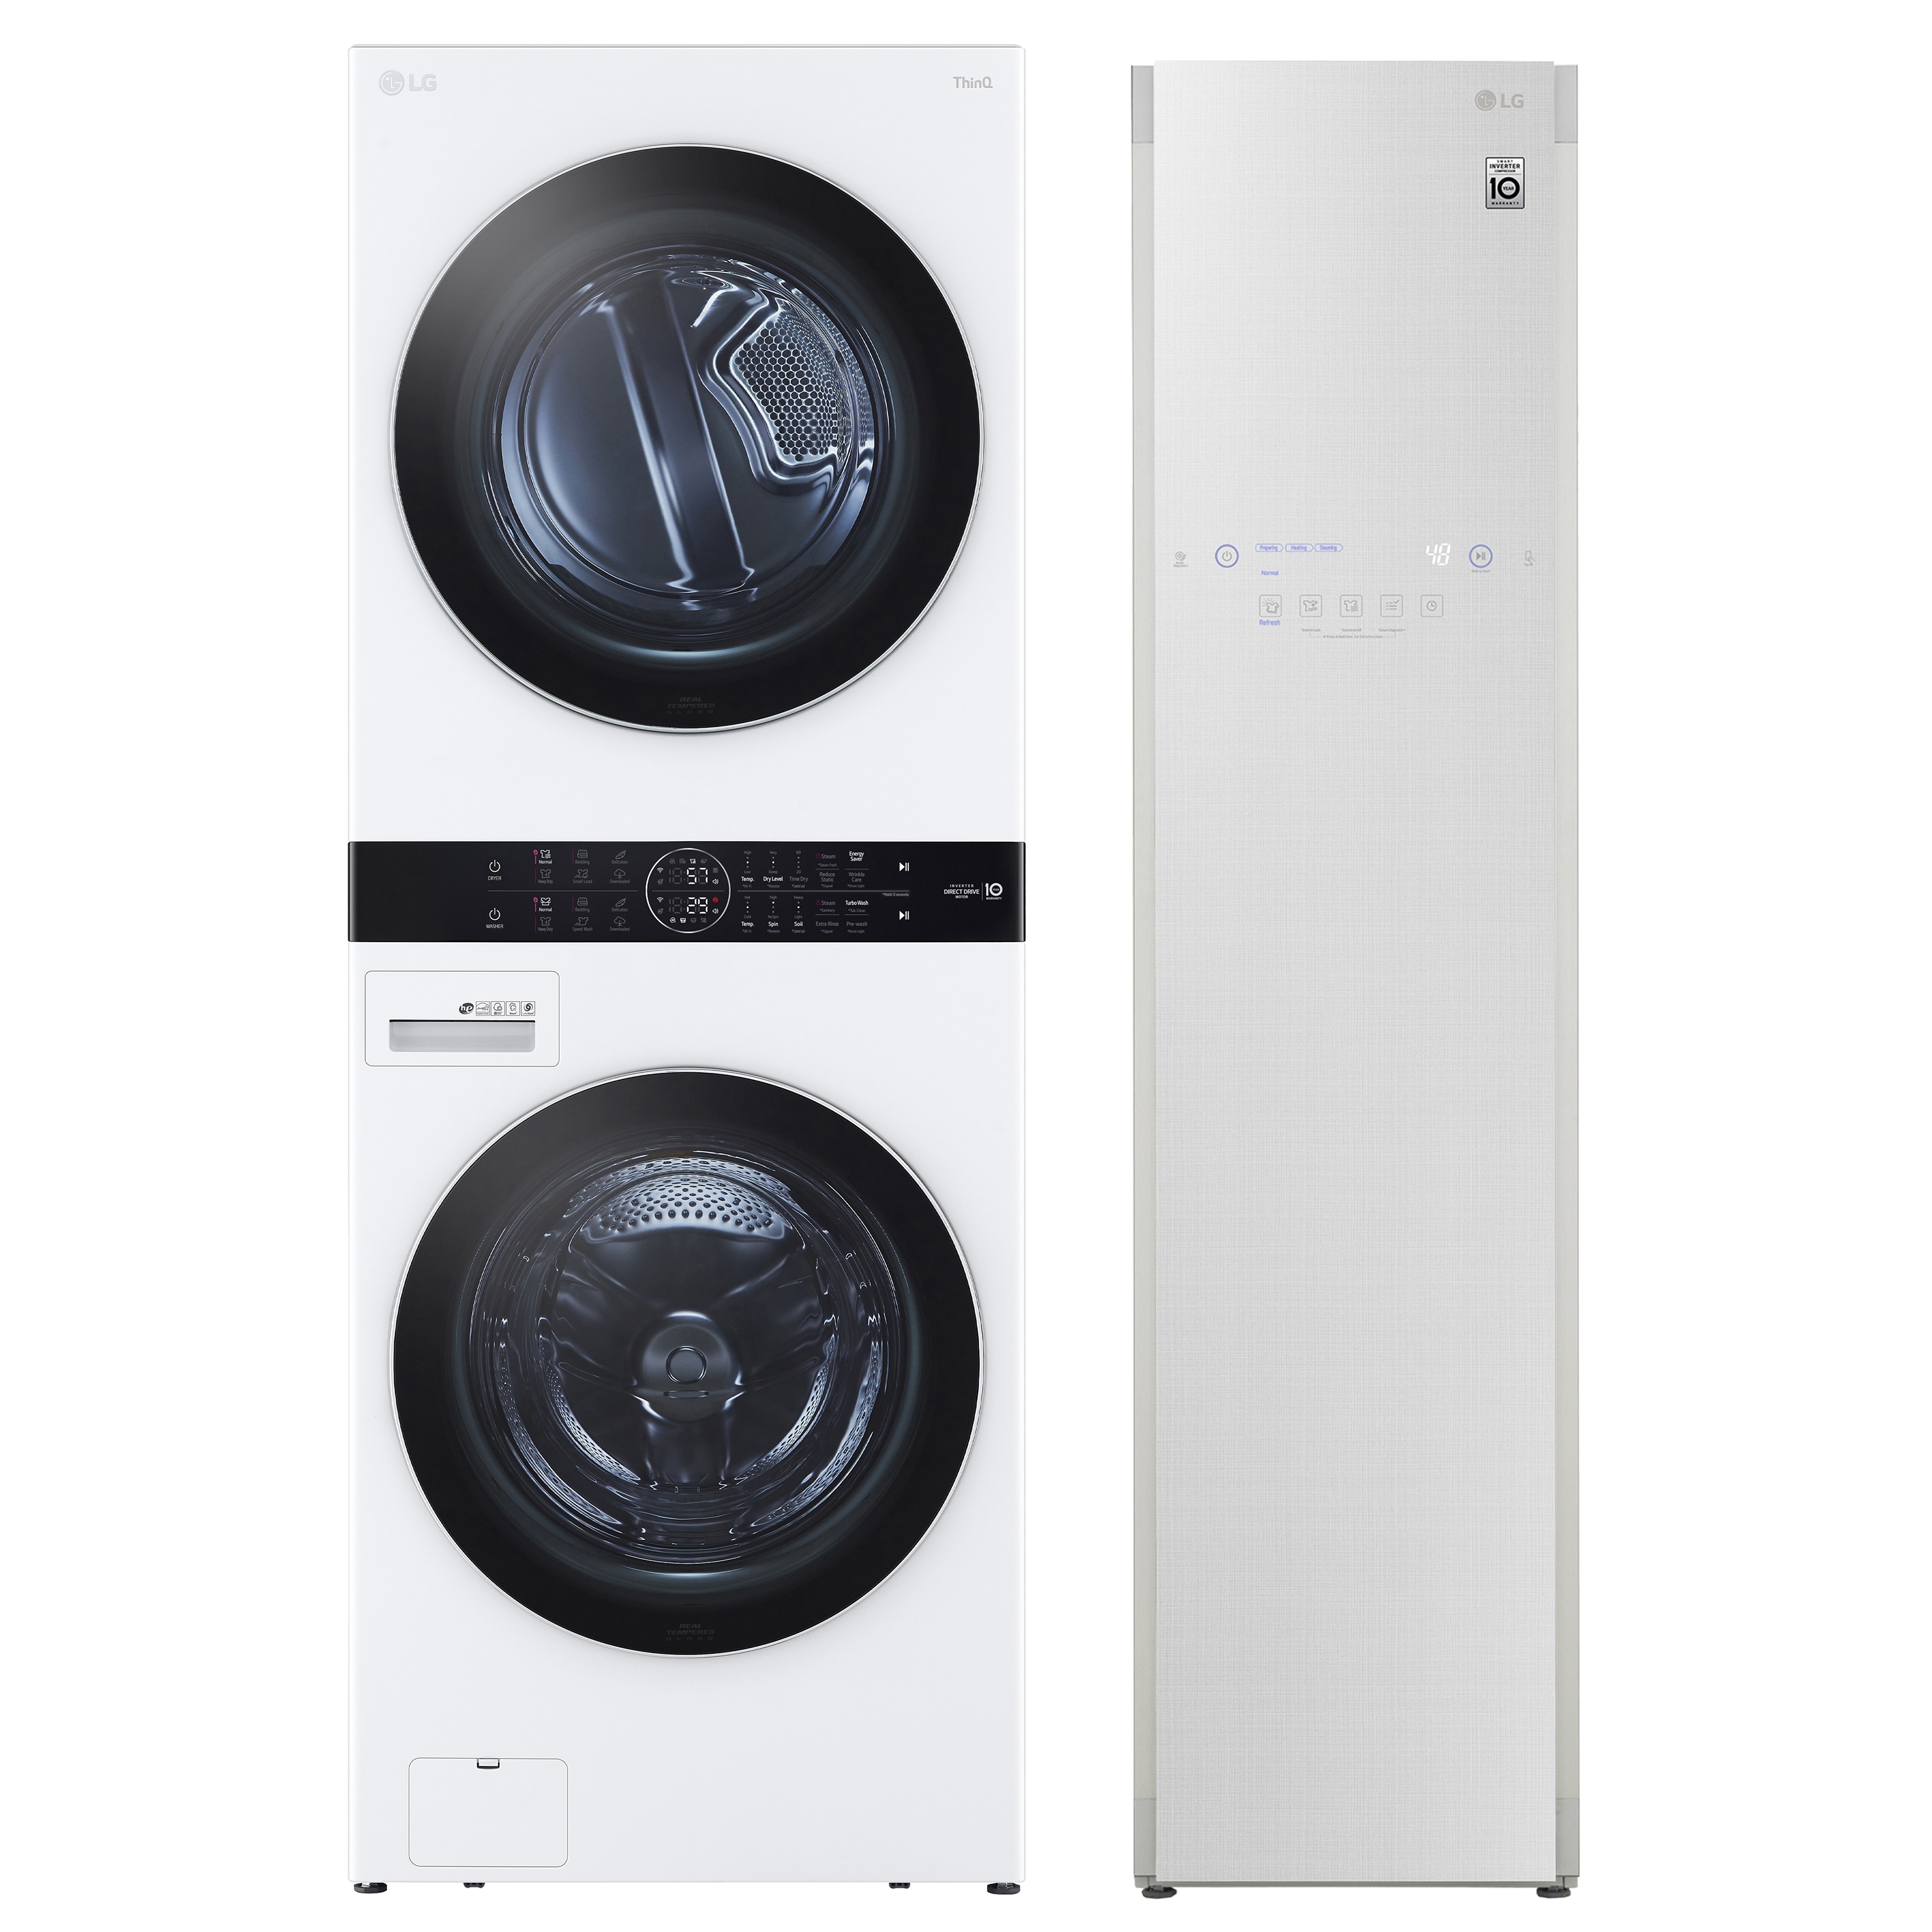 & Dryer Steam Washtower Shop Unit Center White with at Control LG Washer Single Care system Styler